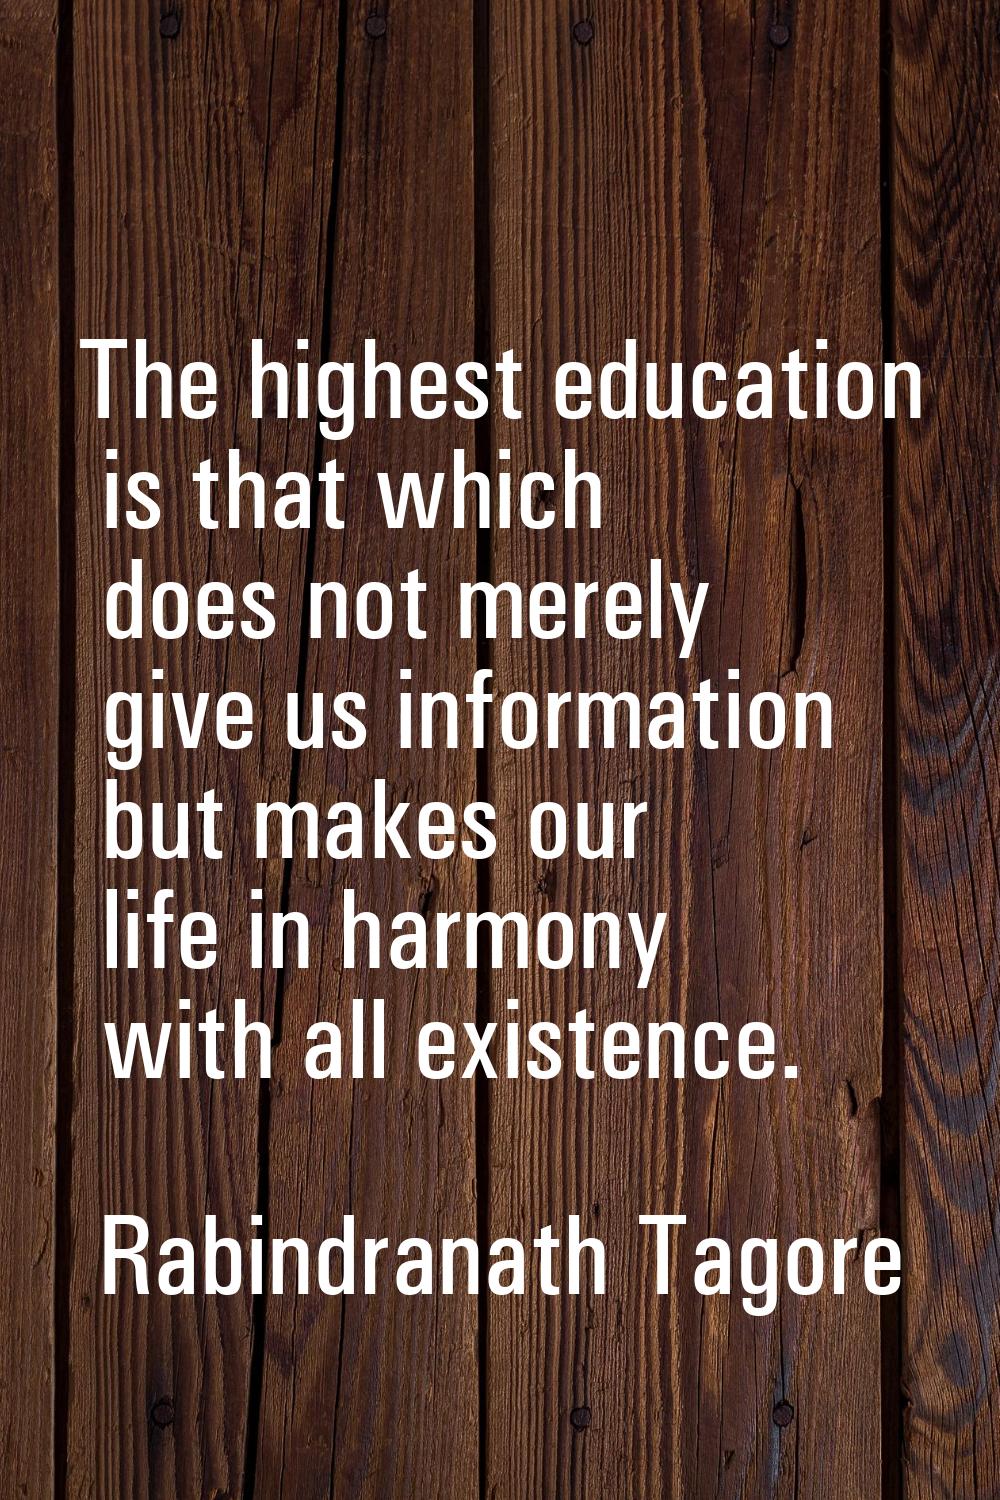 The highest education is that which does not merely give us information but makes our life in harmo